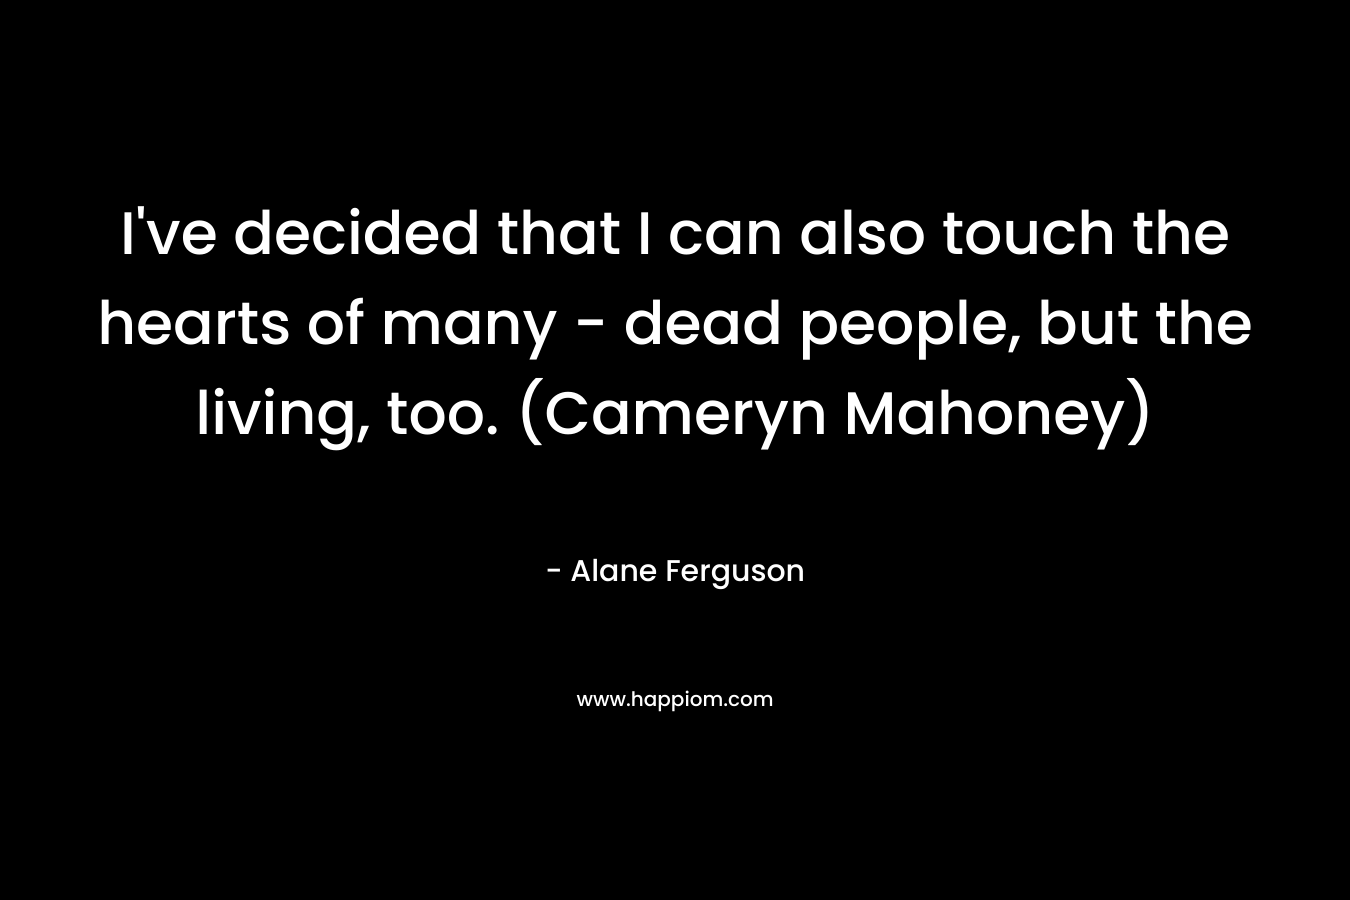 I've decided that I can also touch the hearts of many - dead people, but the living, too. (Cameryn Mahoney)